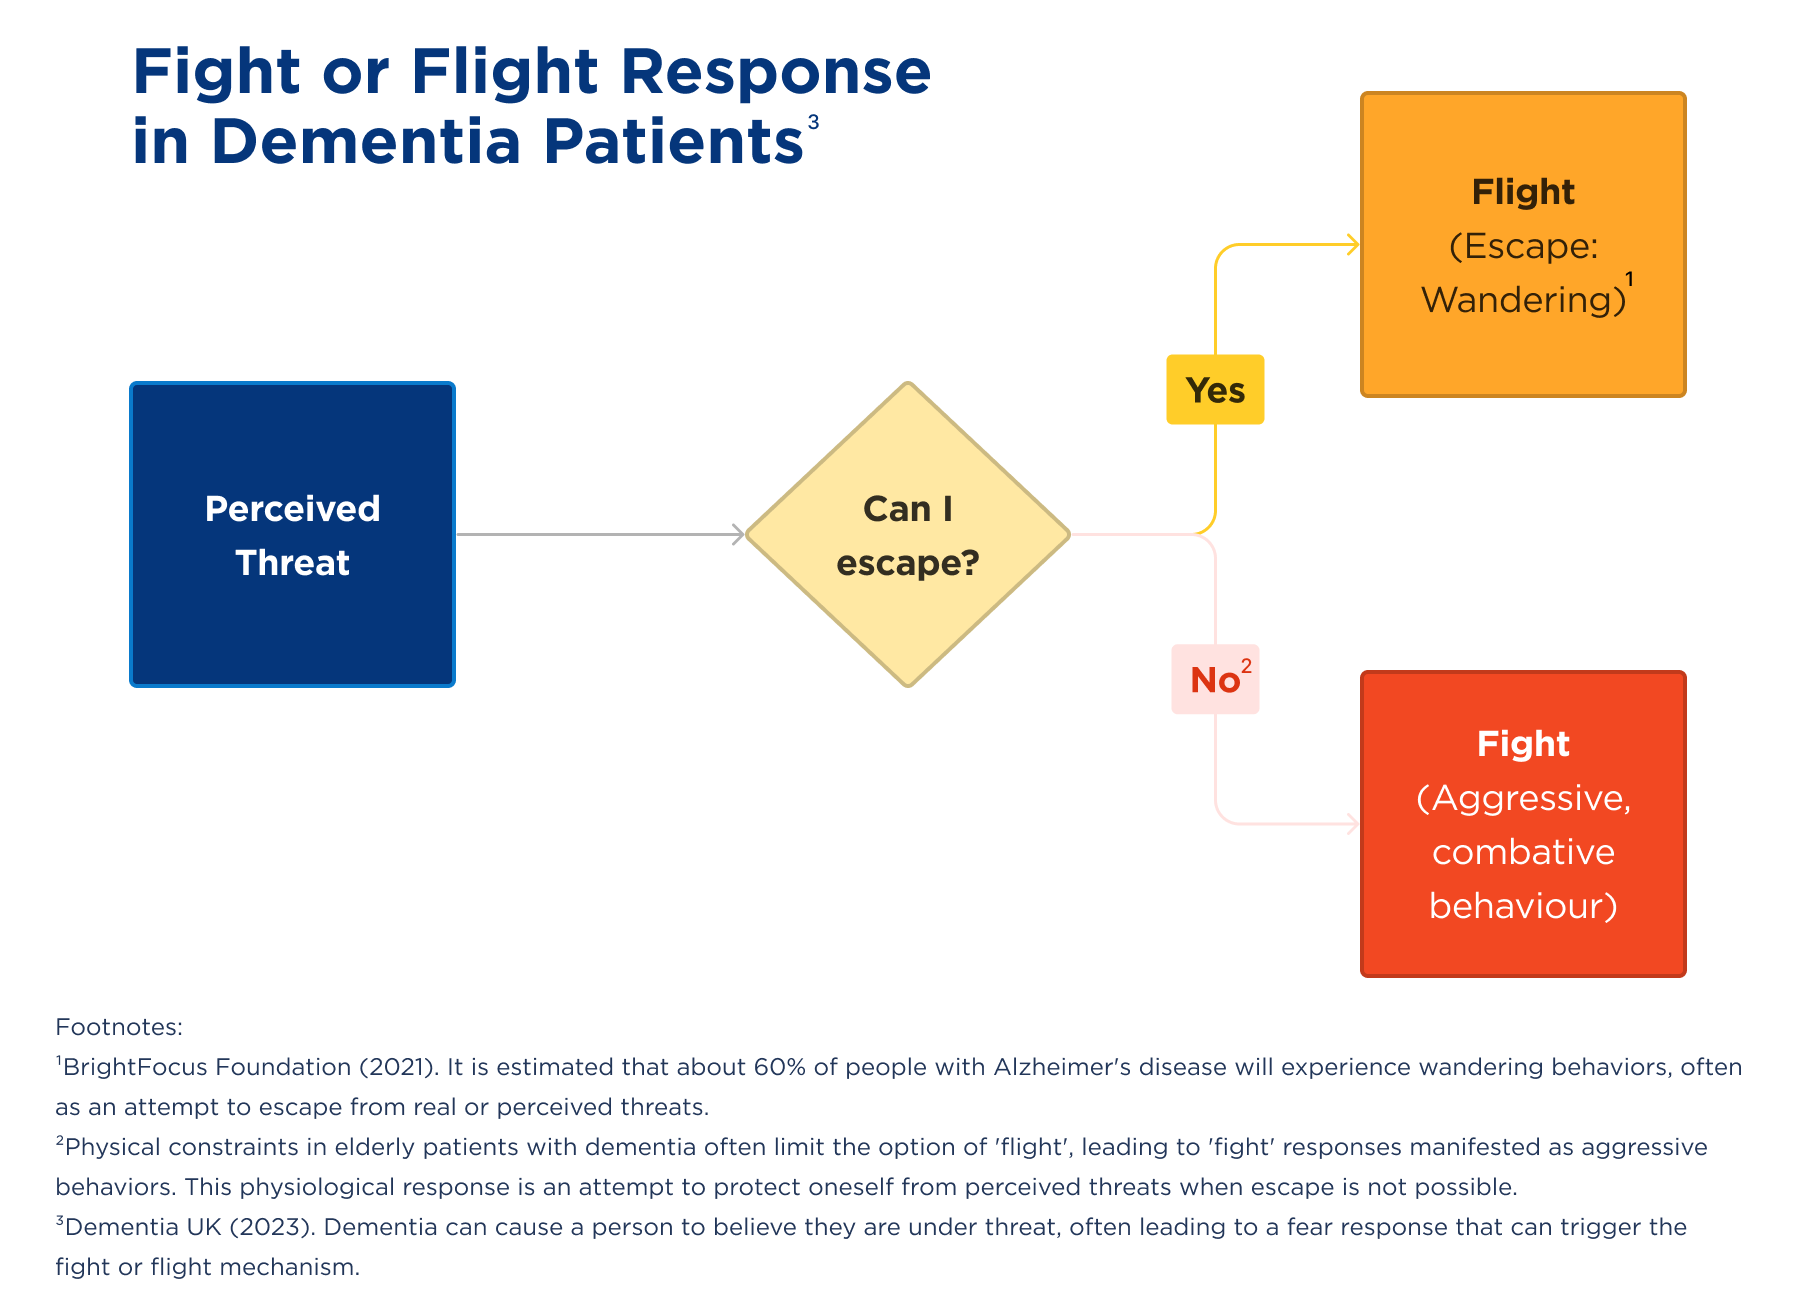 Flow Chart Portraying the Fight or Flight Response in Dementia Patients